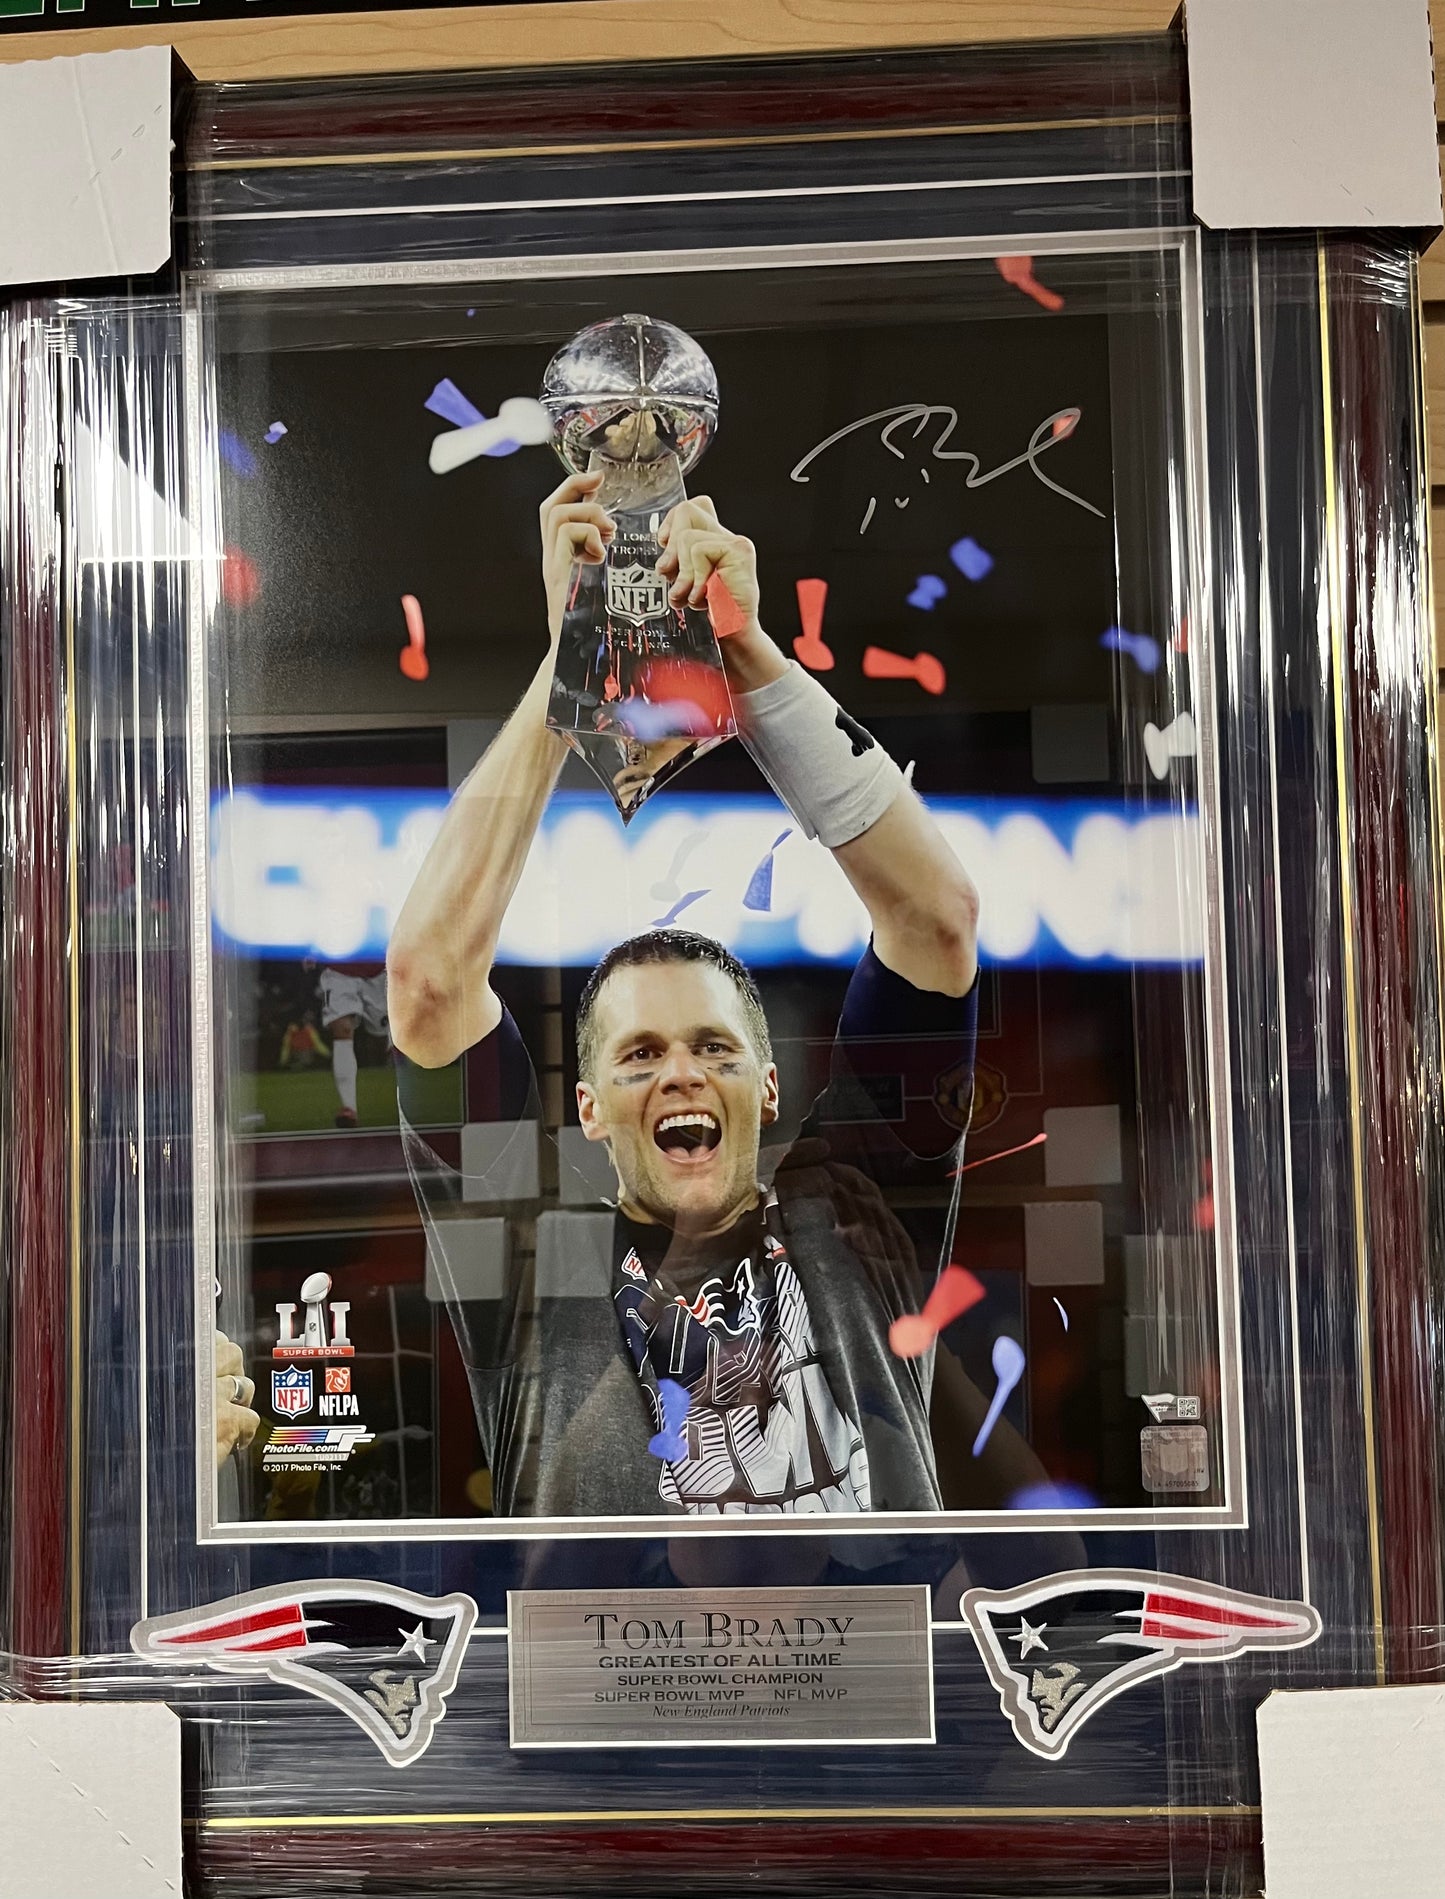 Tom Brady signed 16x20 "Trophy" Profressionally mattted and framed to 22x24